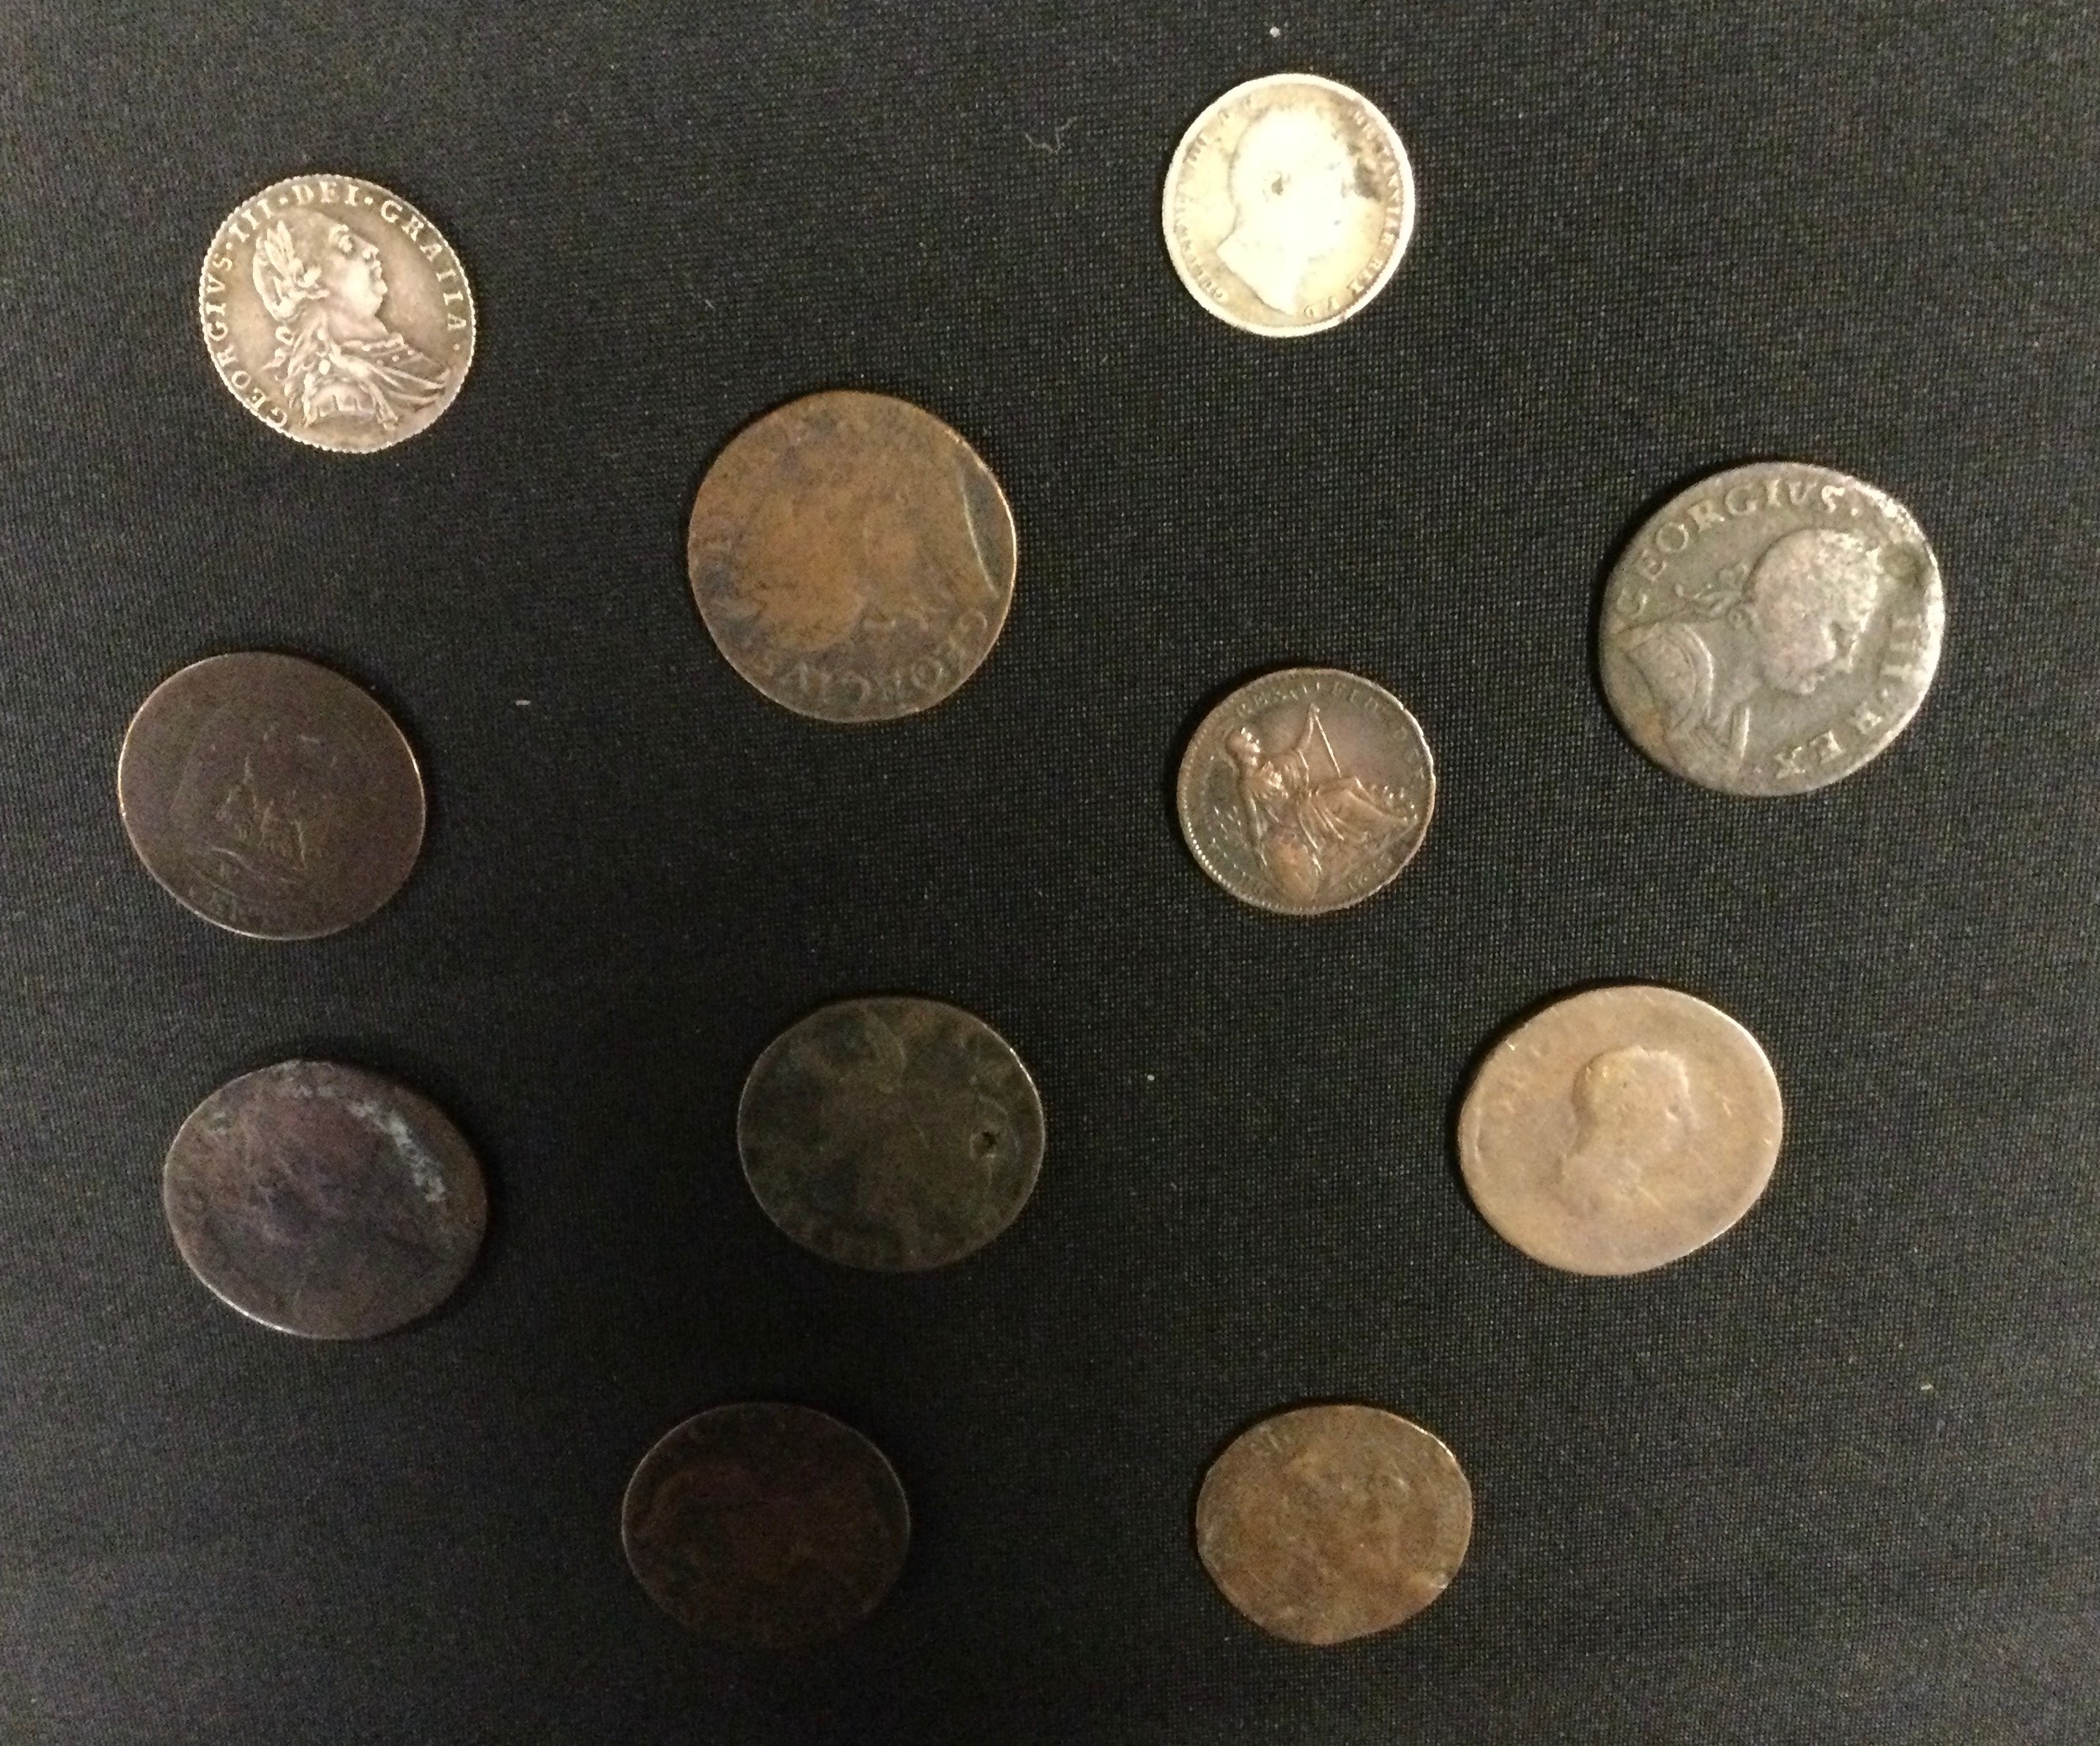 Coins - a George III silver sixpence, 1787, others pennies, George IV 1825 farthing, Napoleon III - Image 2 of 2